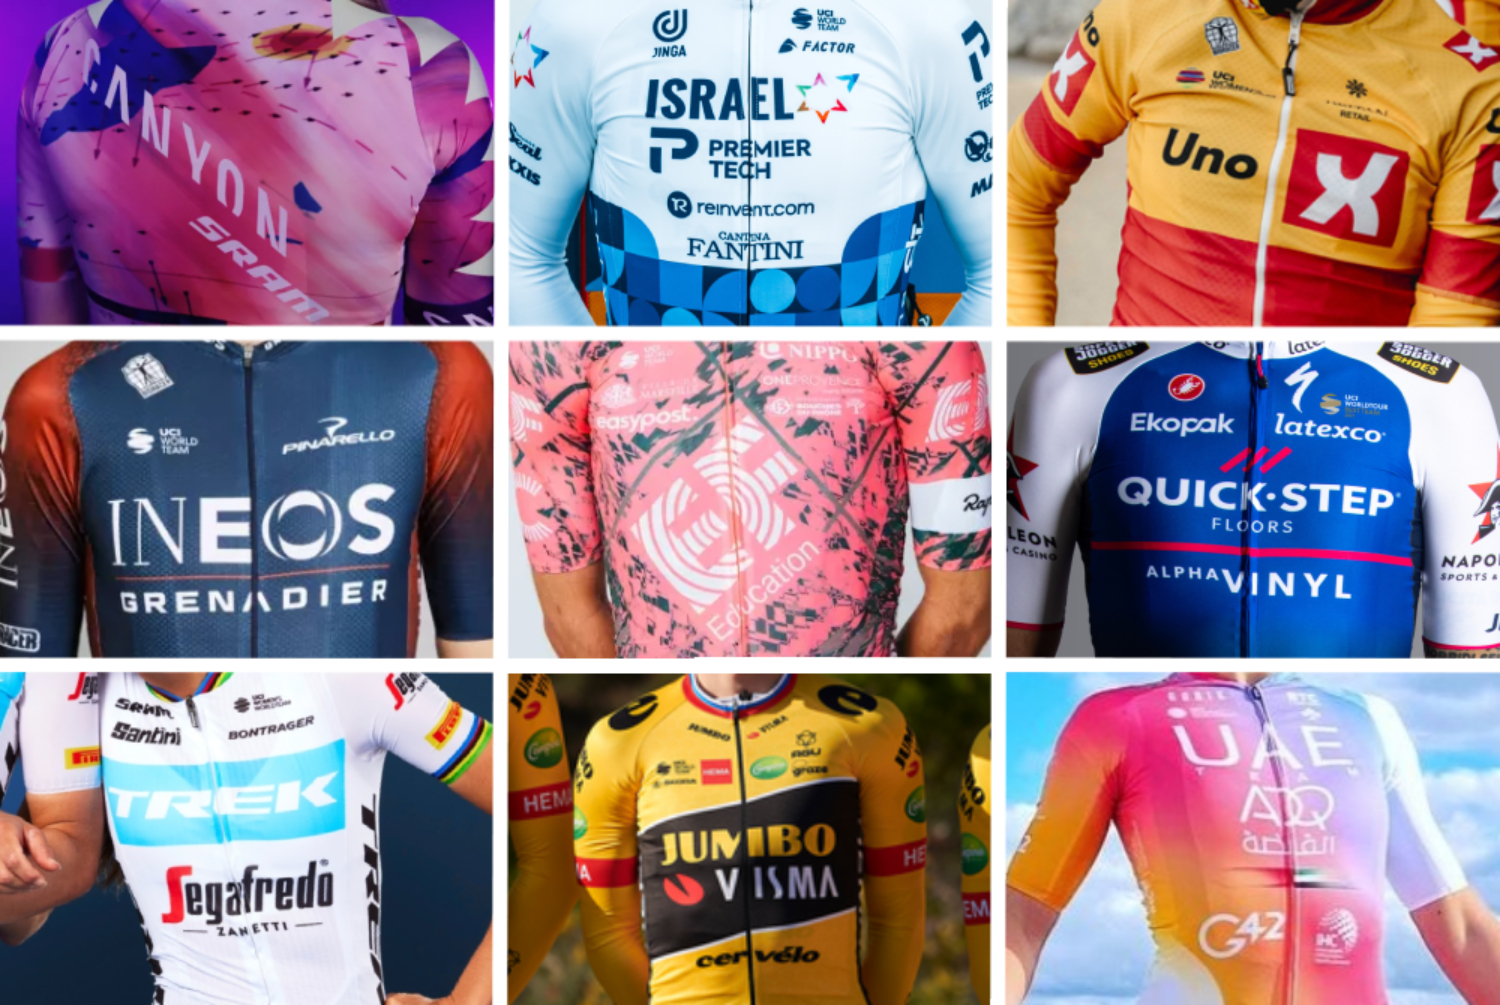 Giant Polimed World Champ Jersey, Official Pro Team Cycling Jerseys